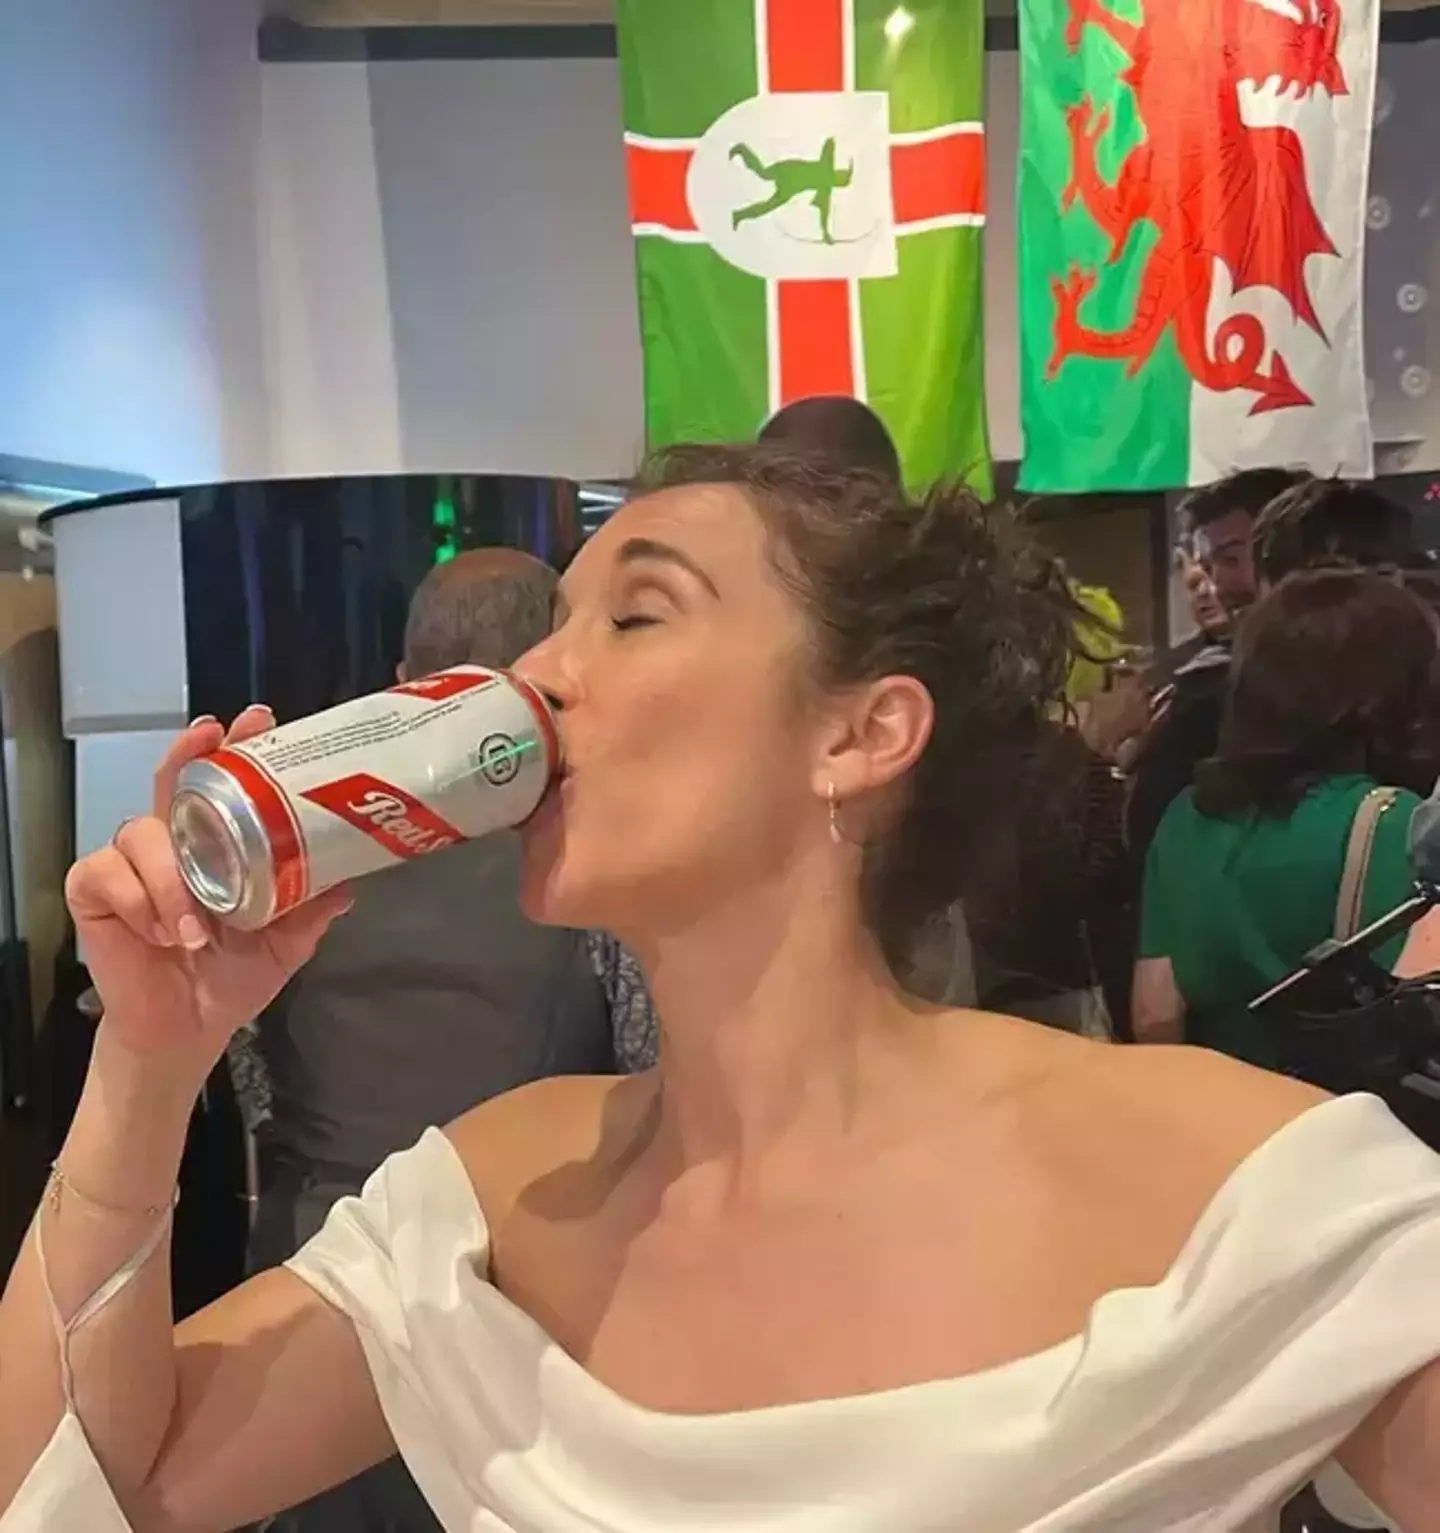 Vicky necked a Red Stripe during her celebrations.